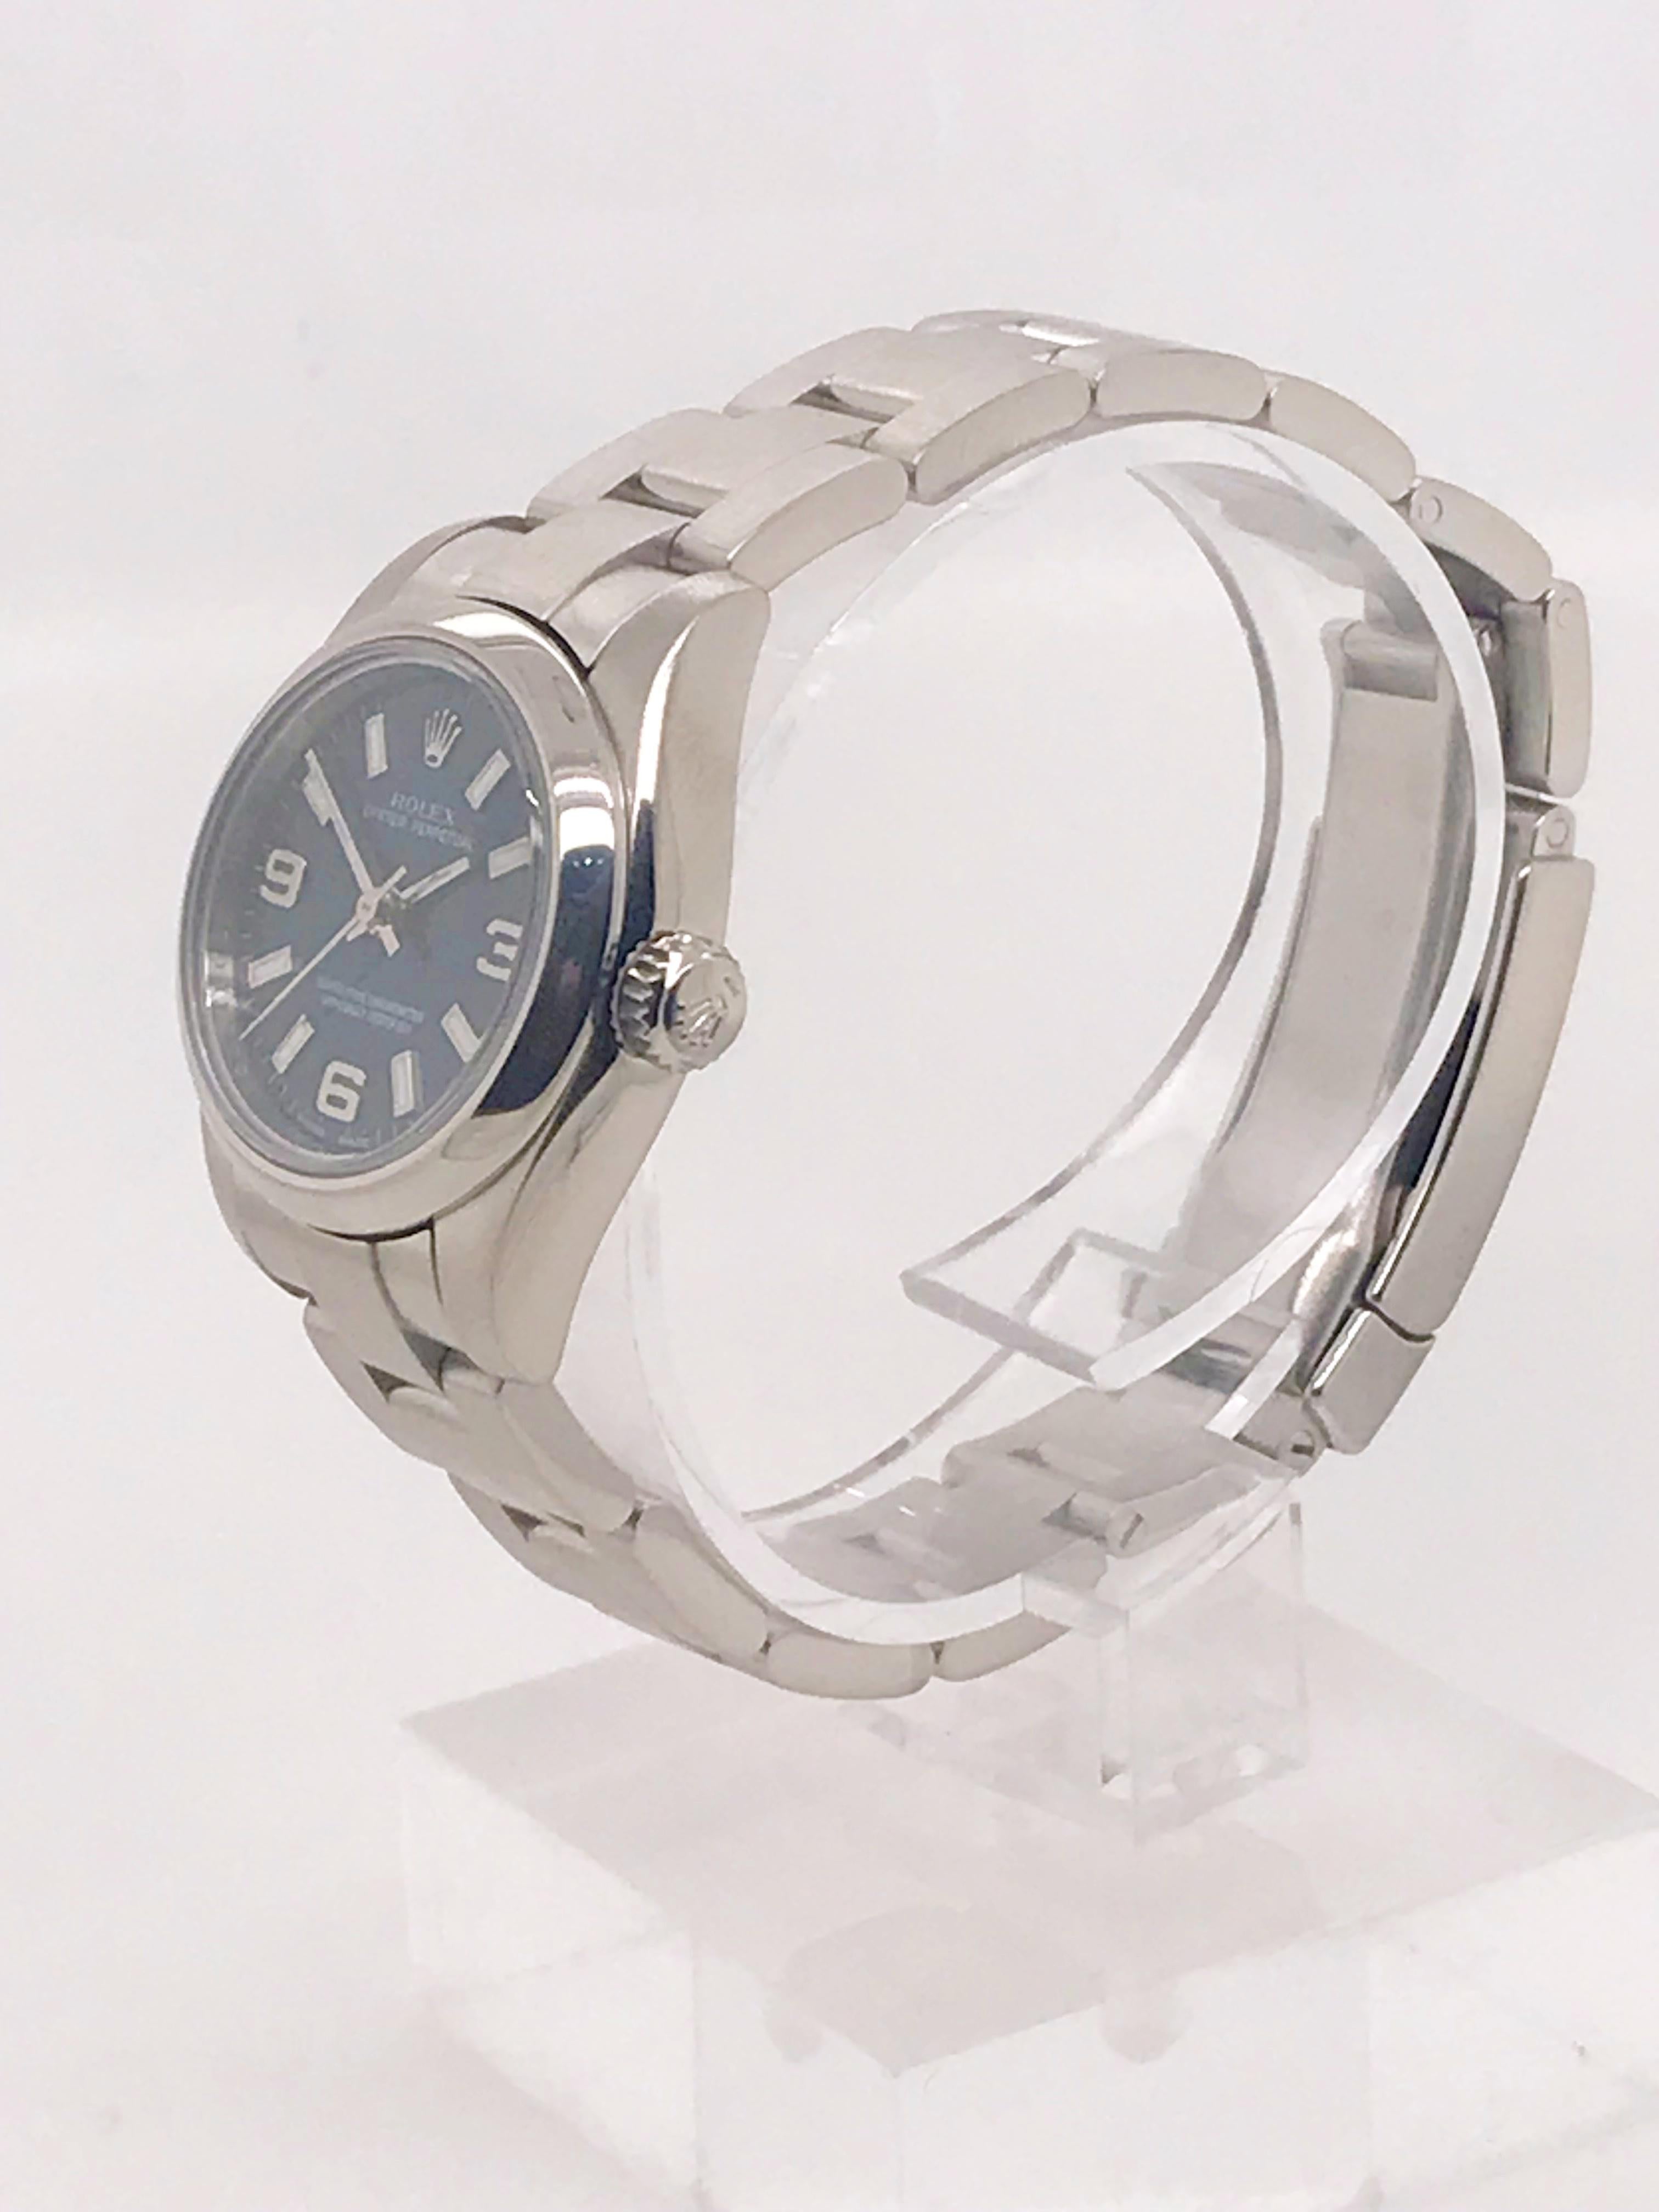 This circa 2007 Ladies Rolex Oyster Perpetual features a blue dial with Arabic numerals and a stainless steel oyster bracelet. Sold with Original outer box, internal box, hang tag, seal, and information cards. 

Serial Number: M9*****


This time